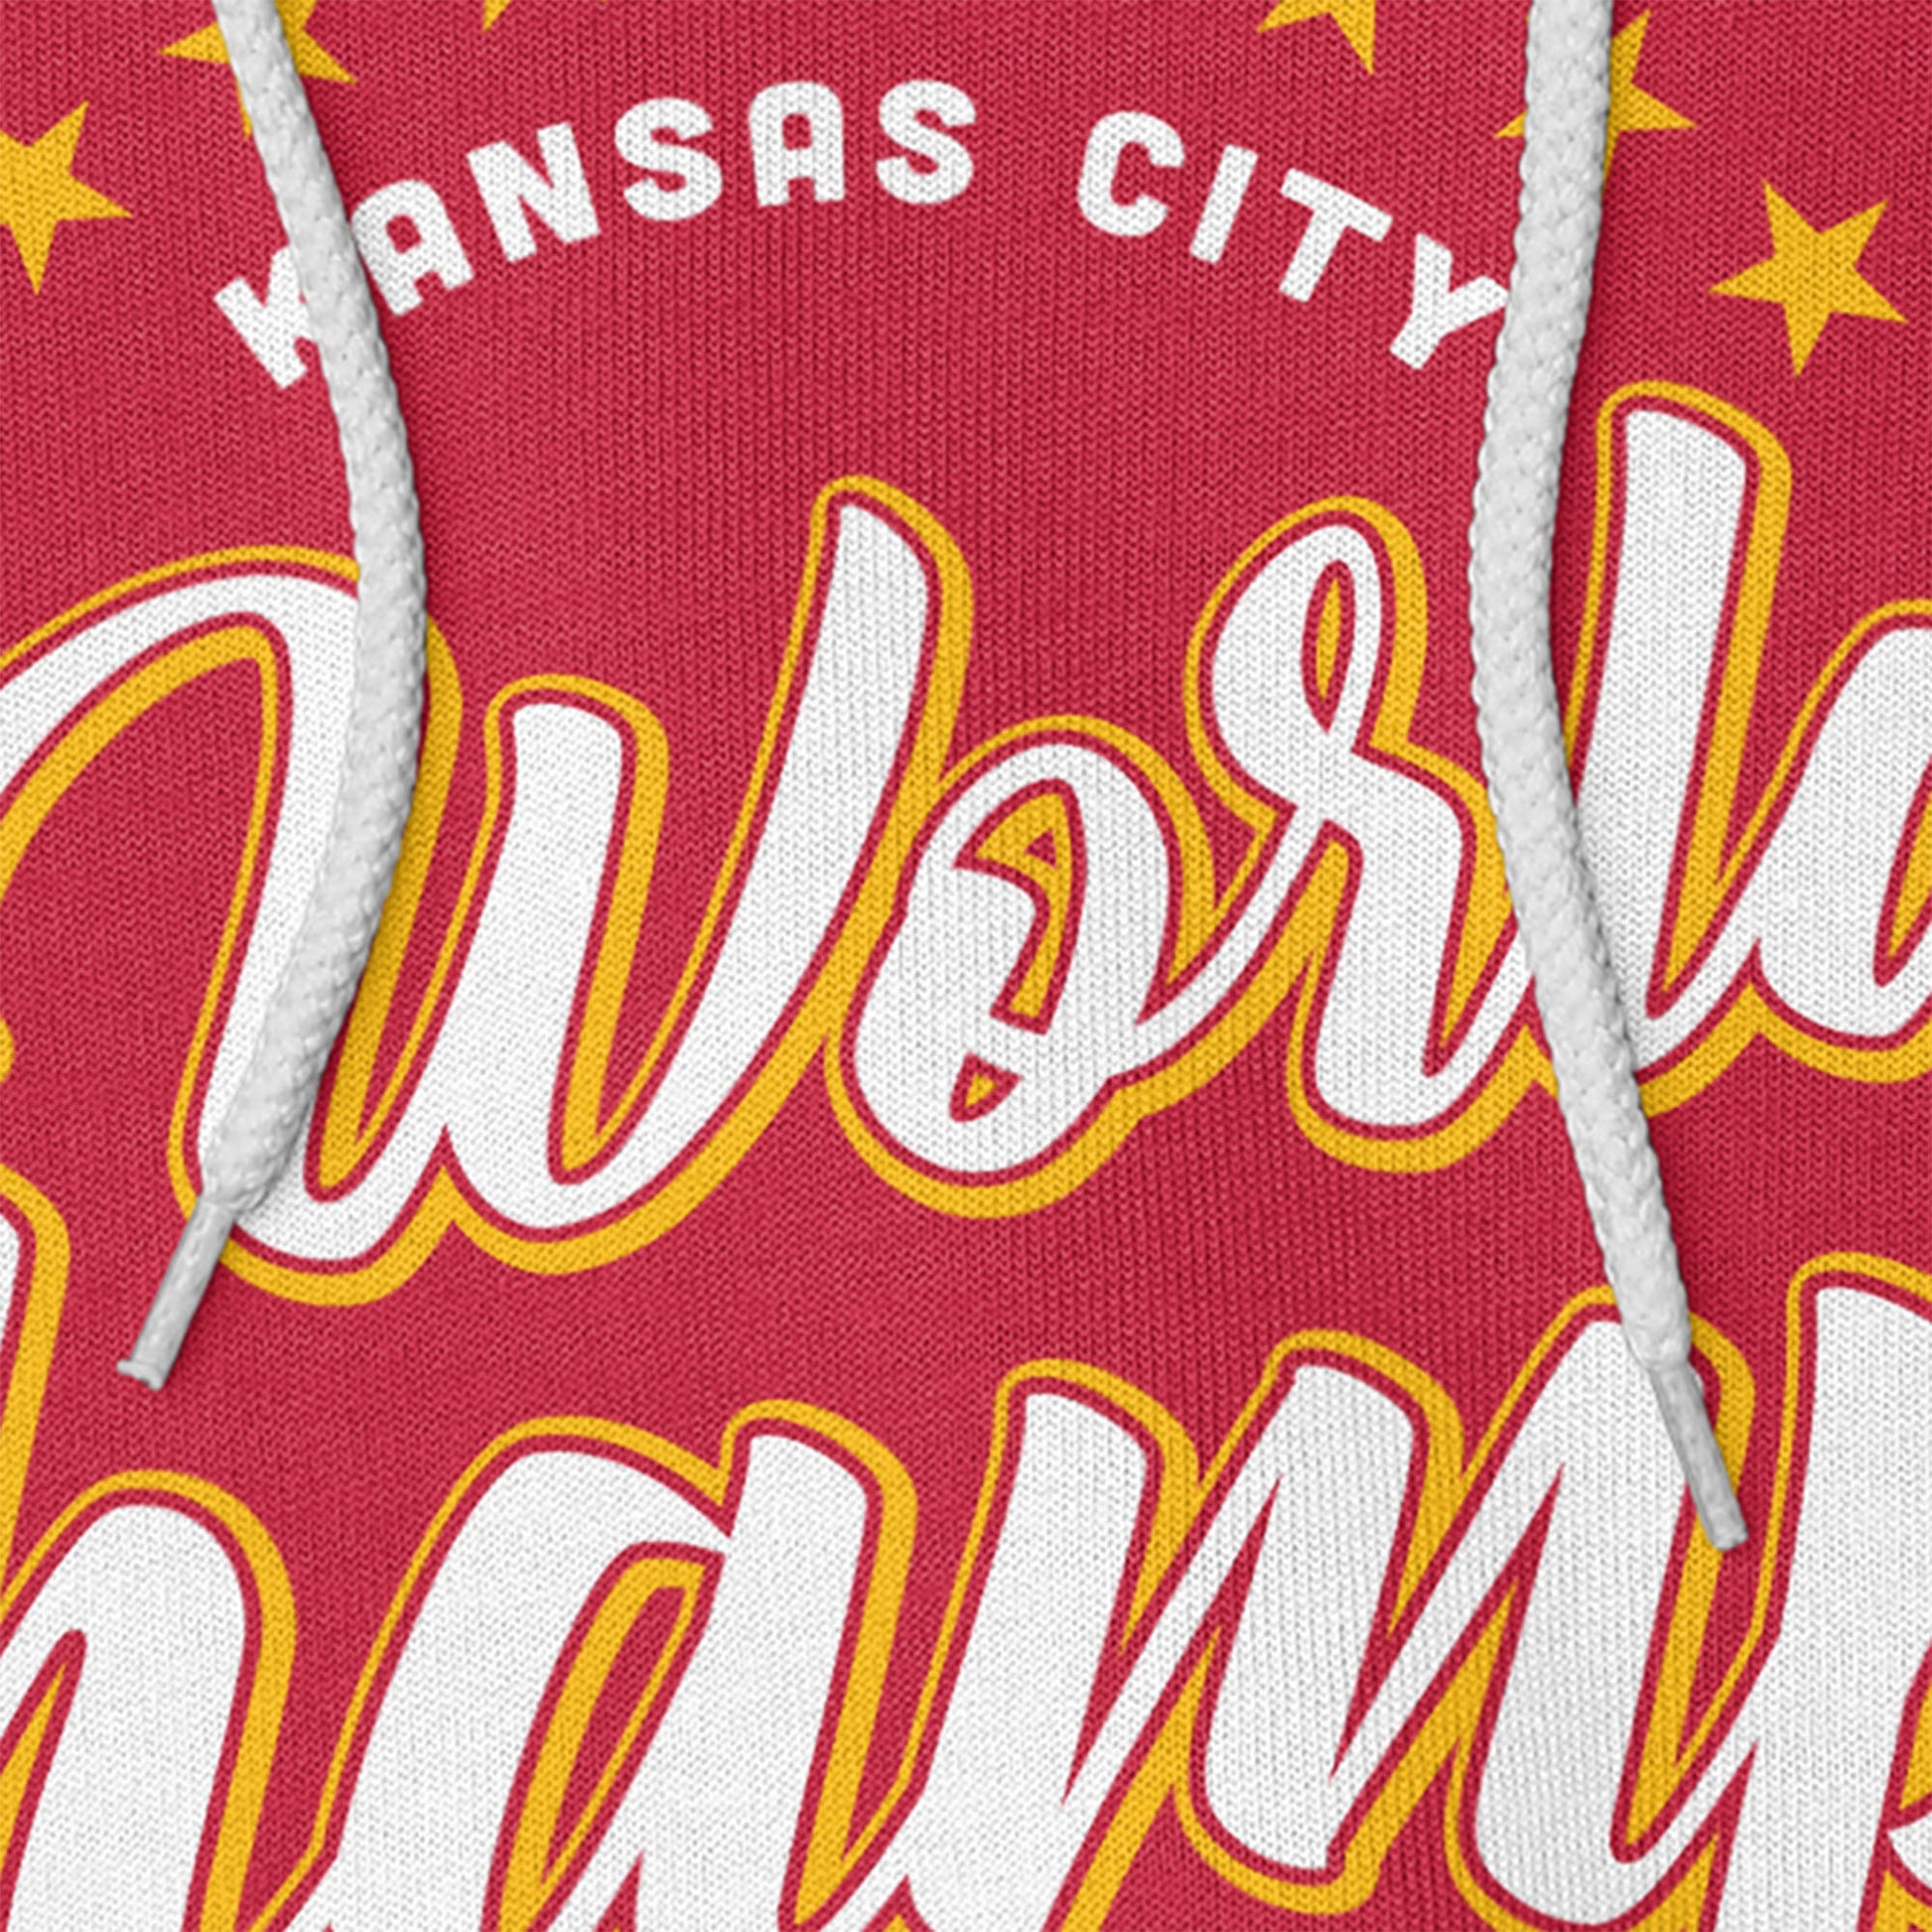 KC Swag Kansas City WORLD CHAMPS SBLIV on red fleece pullover hoodie closeup details of printed graphics